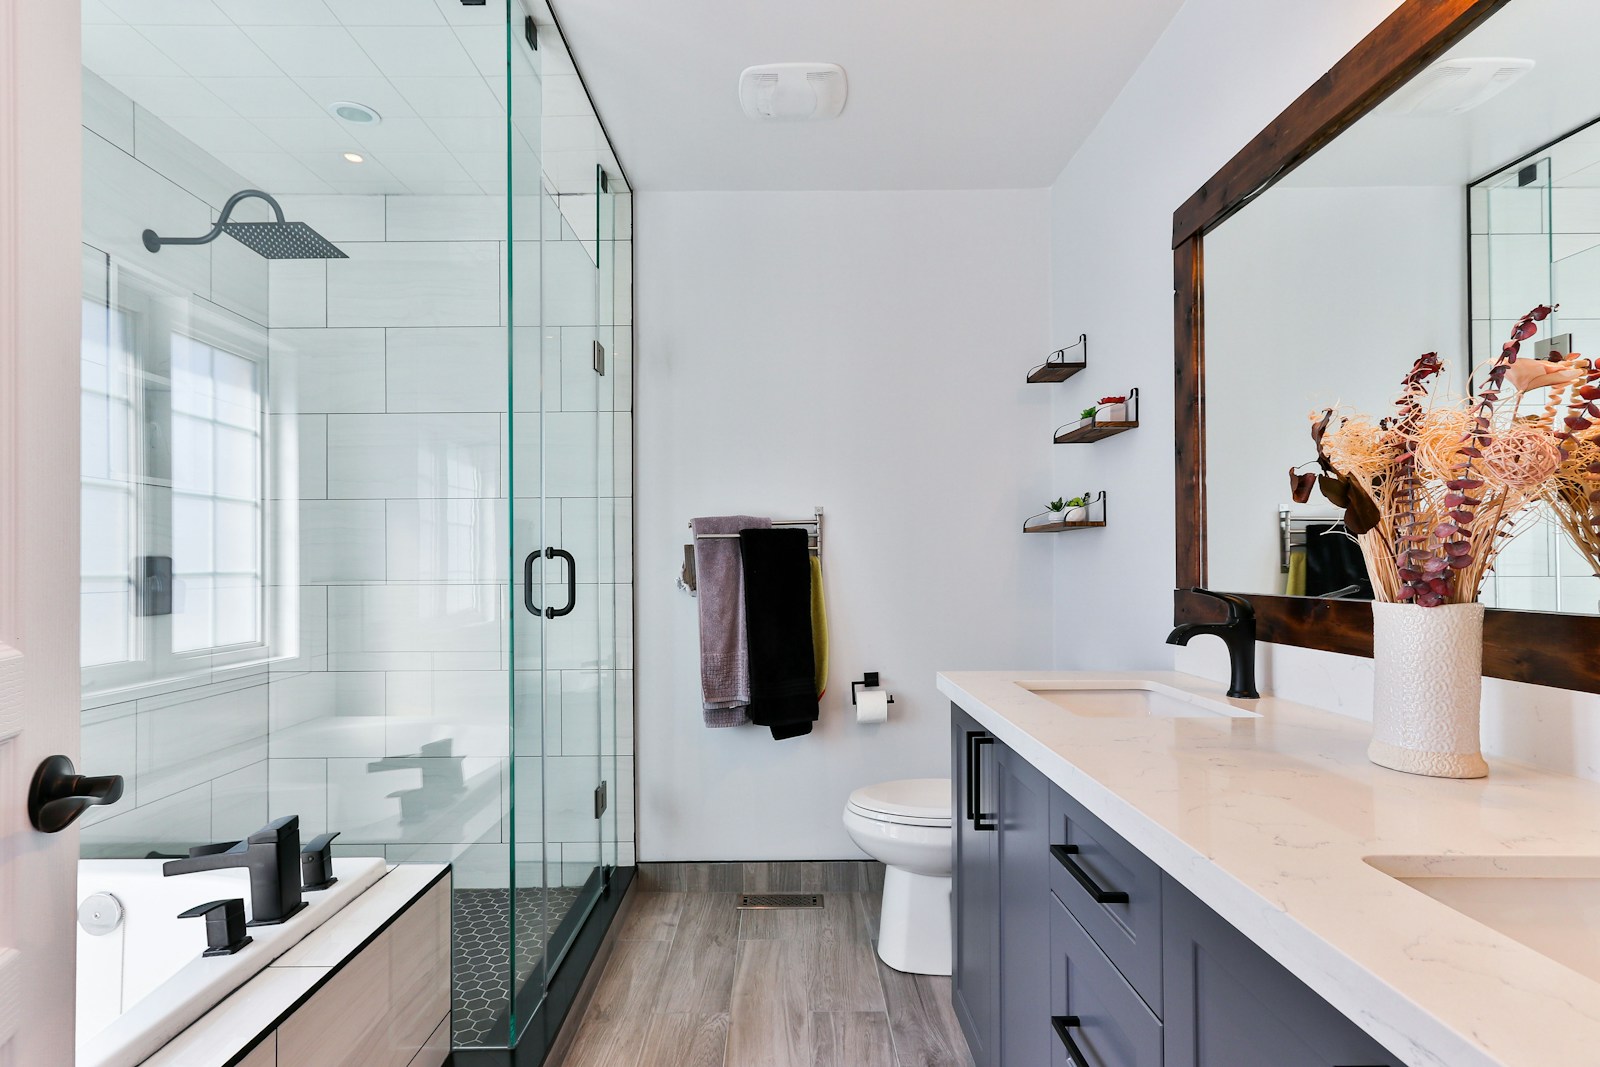 A Beginner’s Guide to Decorating Your Bathroom